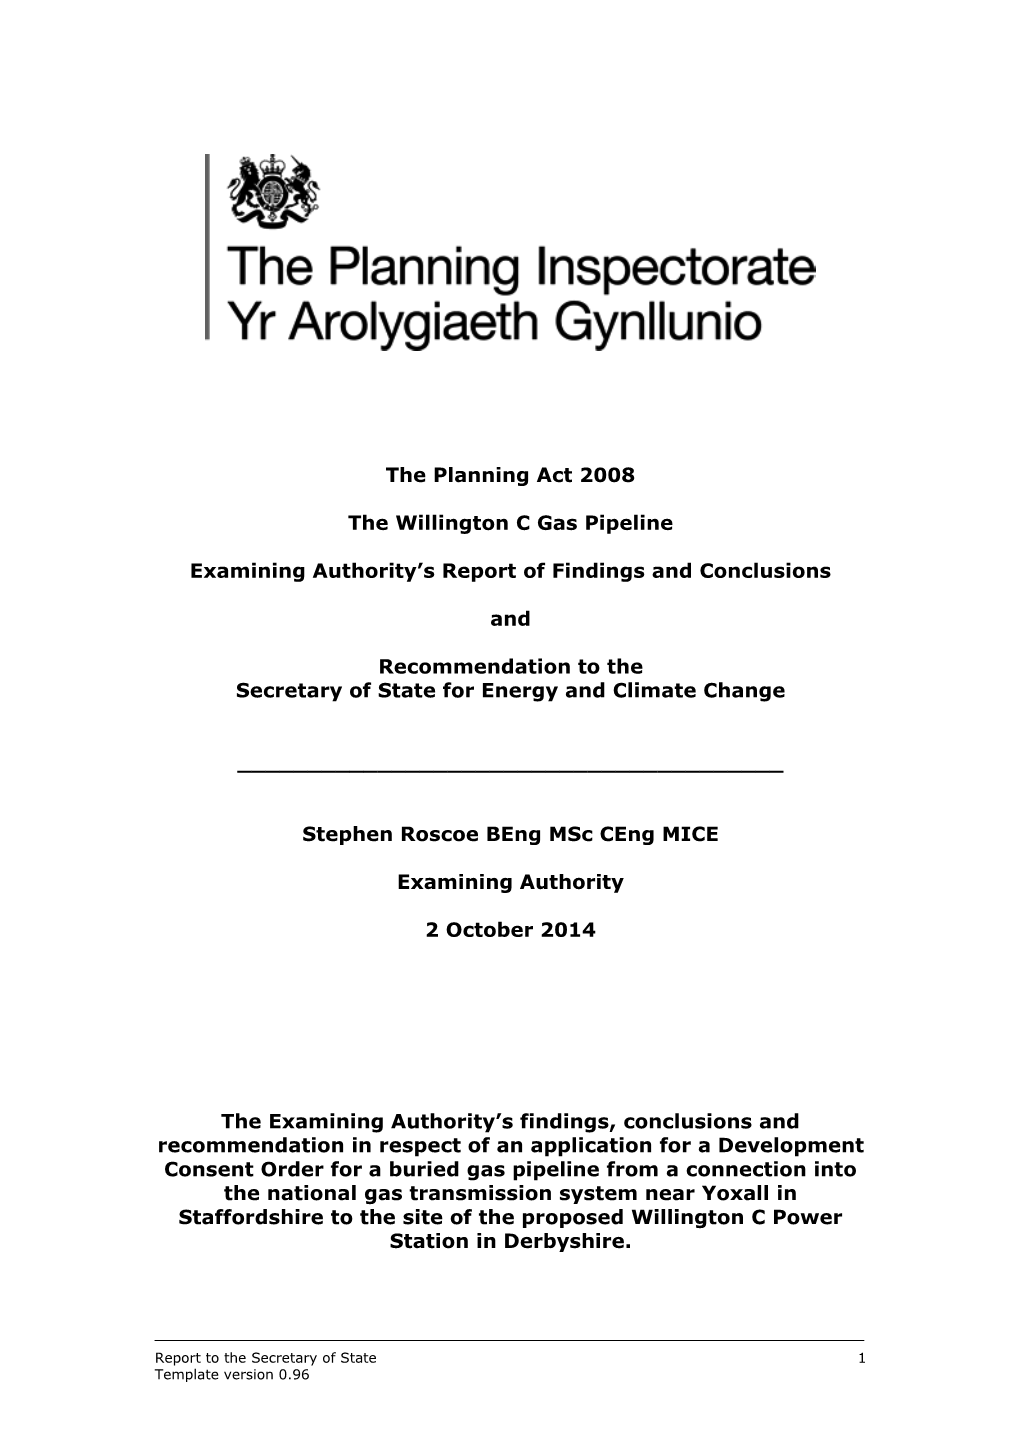 The Planning Act 2008 the Willington C Gas Pipeline Examining